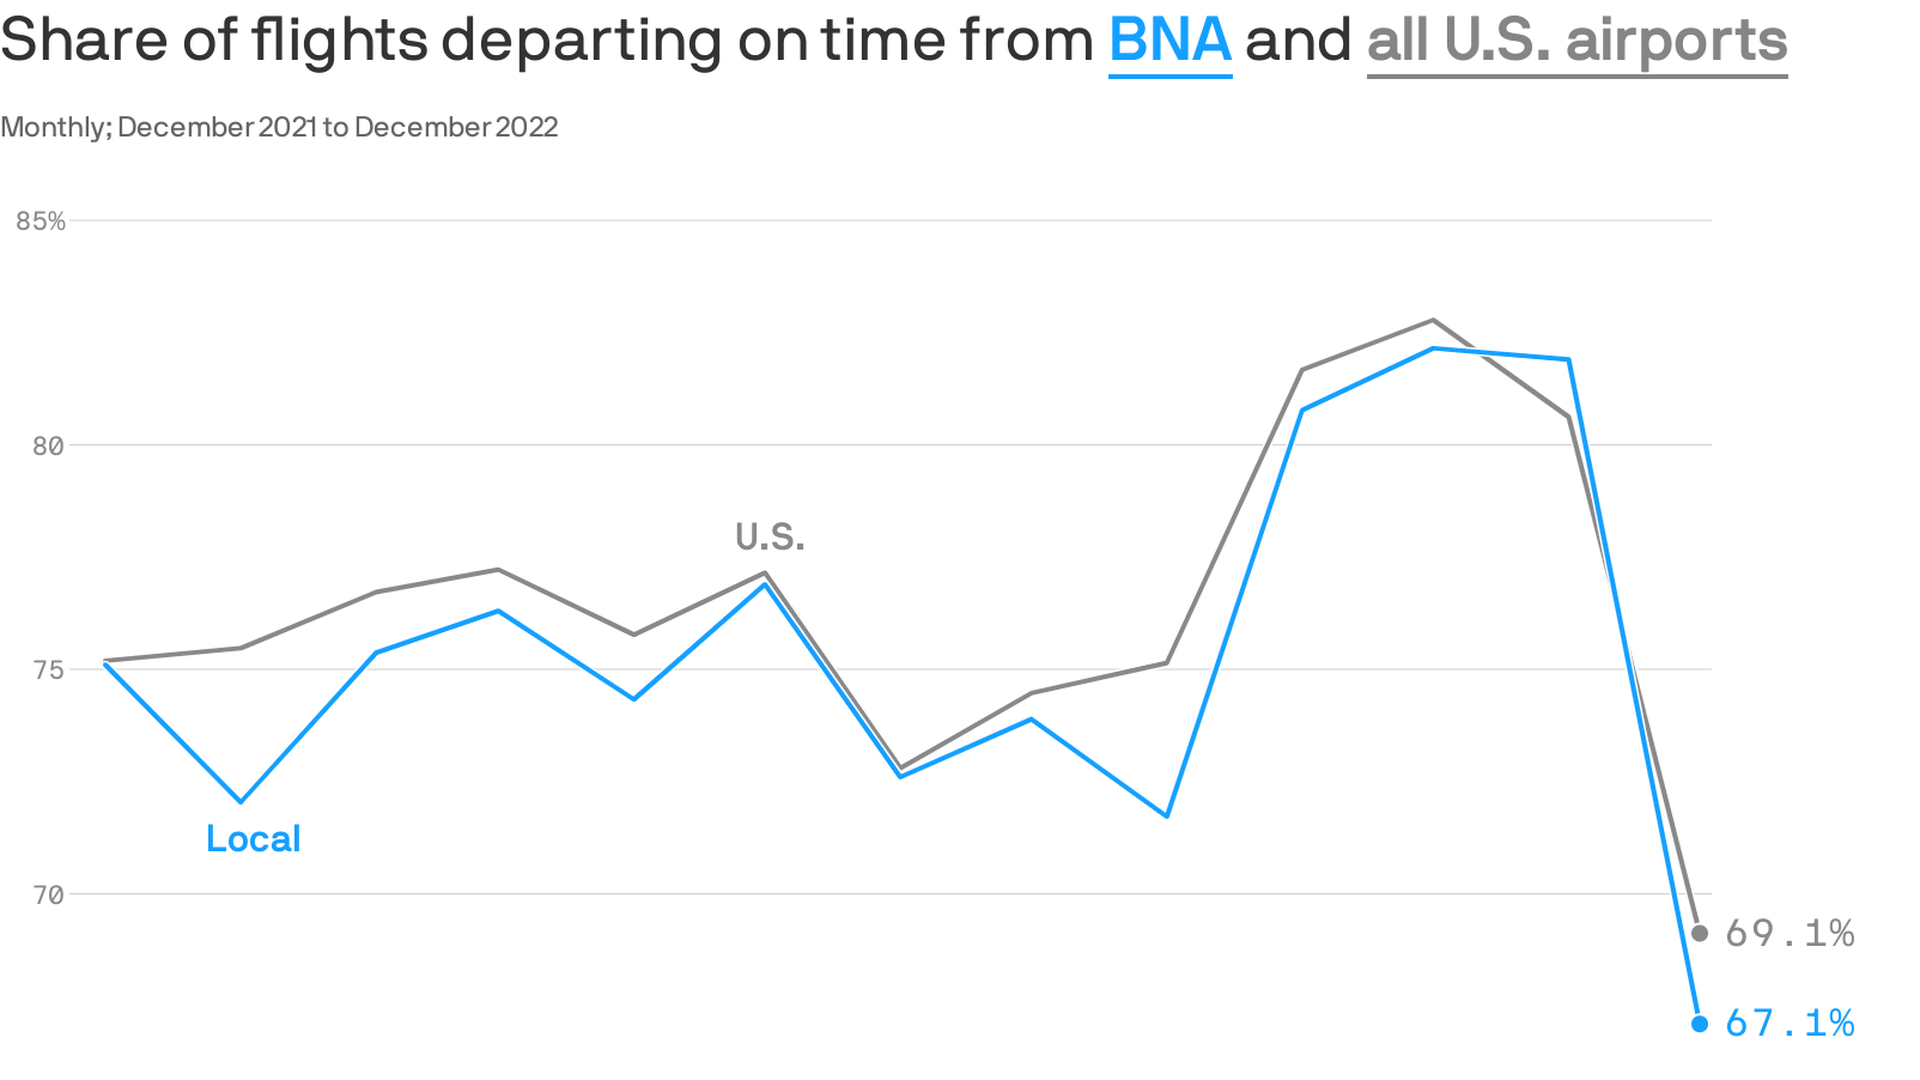 Chart showing on time departures from BNA over time.